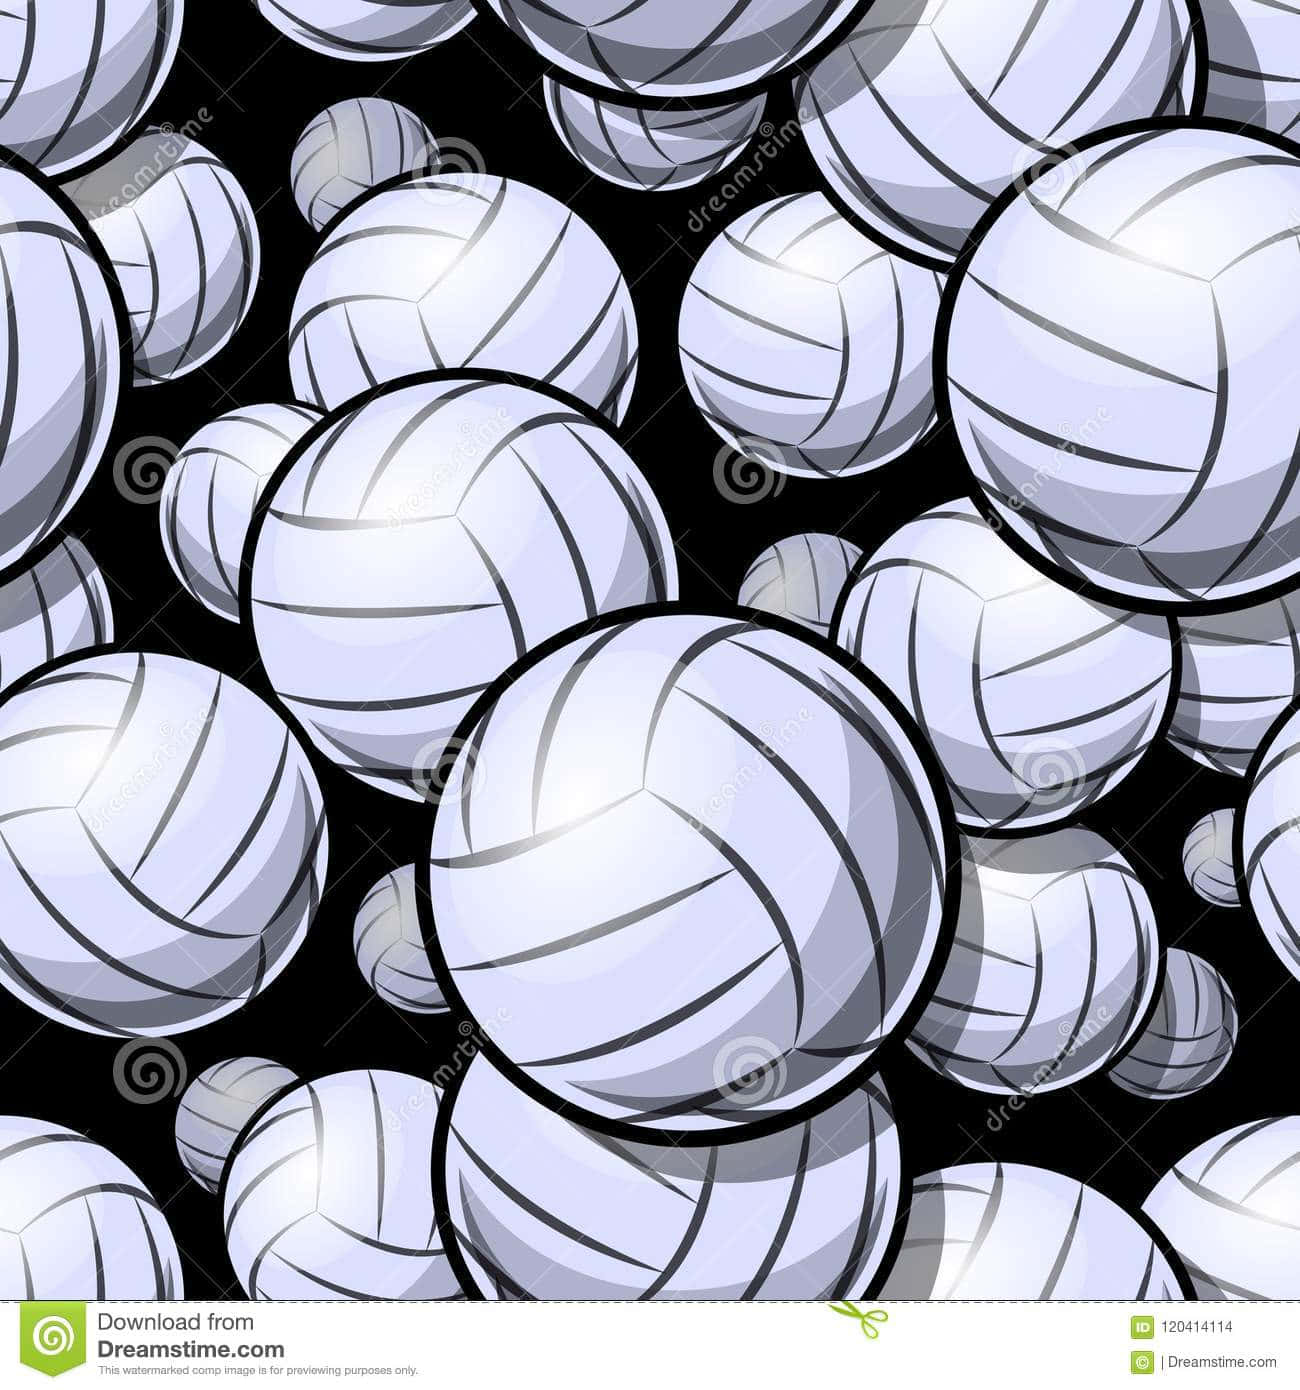 "Bump, Set and Spike! Serve up a Volleyball Rally" Wallpaper